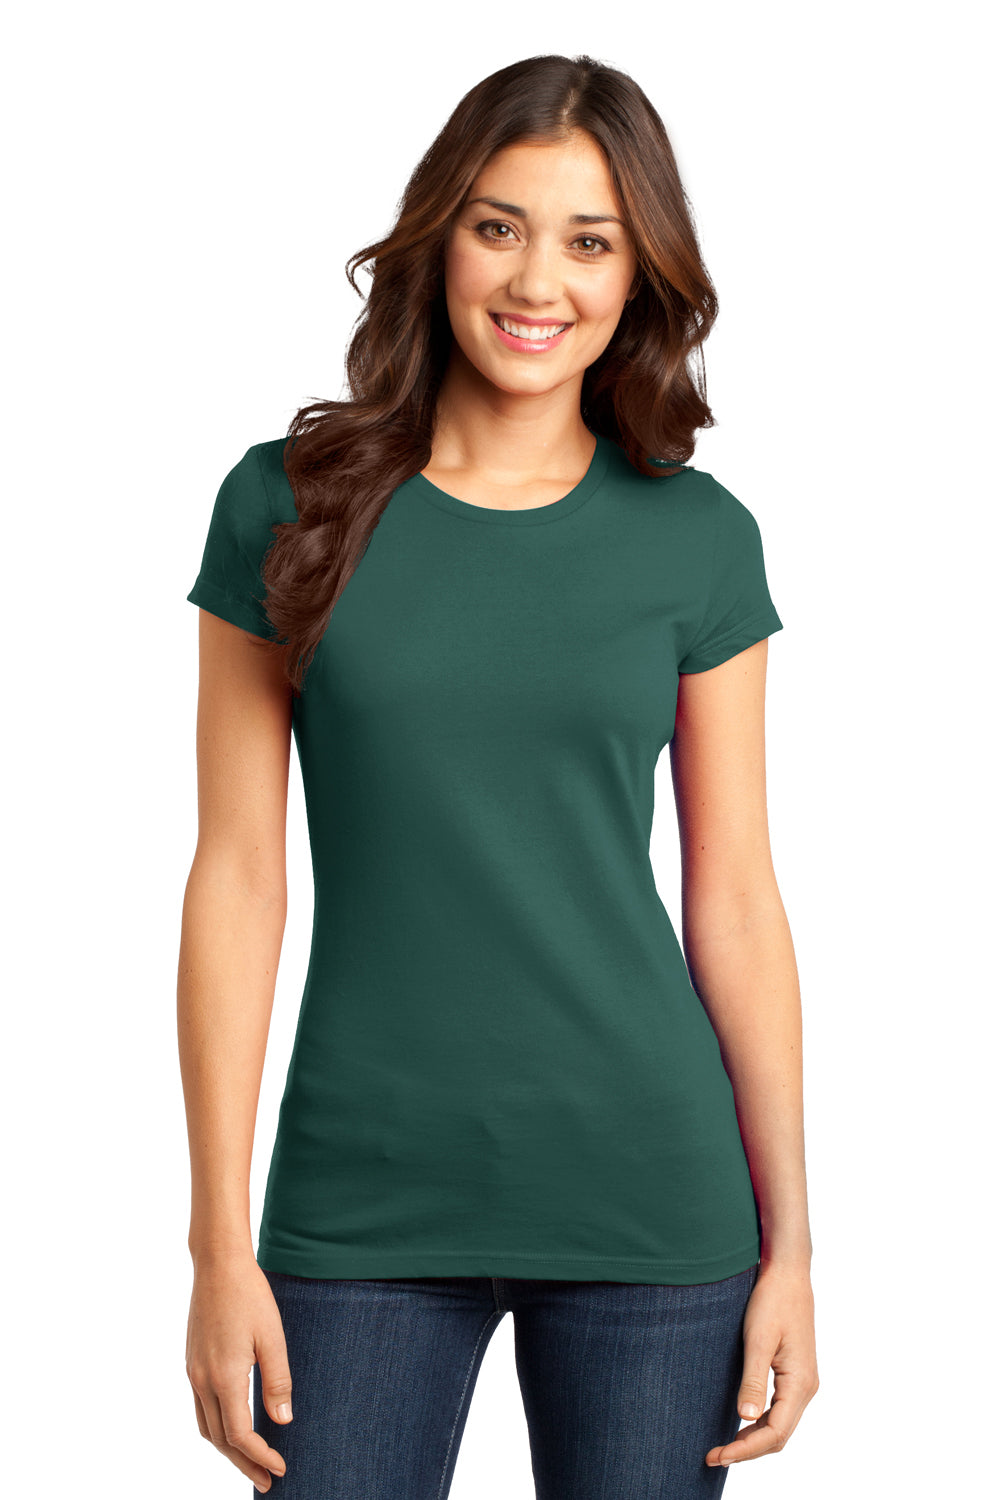 District DT6001 Womens Very Important Short Sleeve Crewneck T-Shirt Evergreen Front